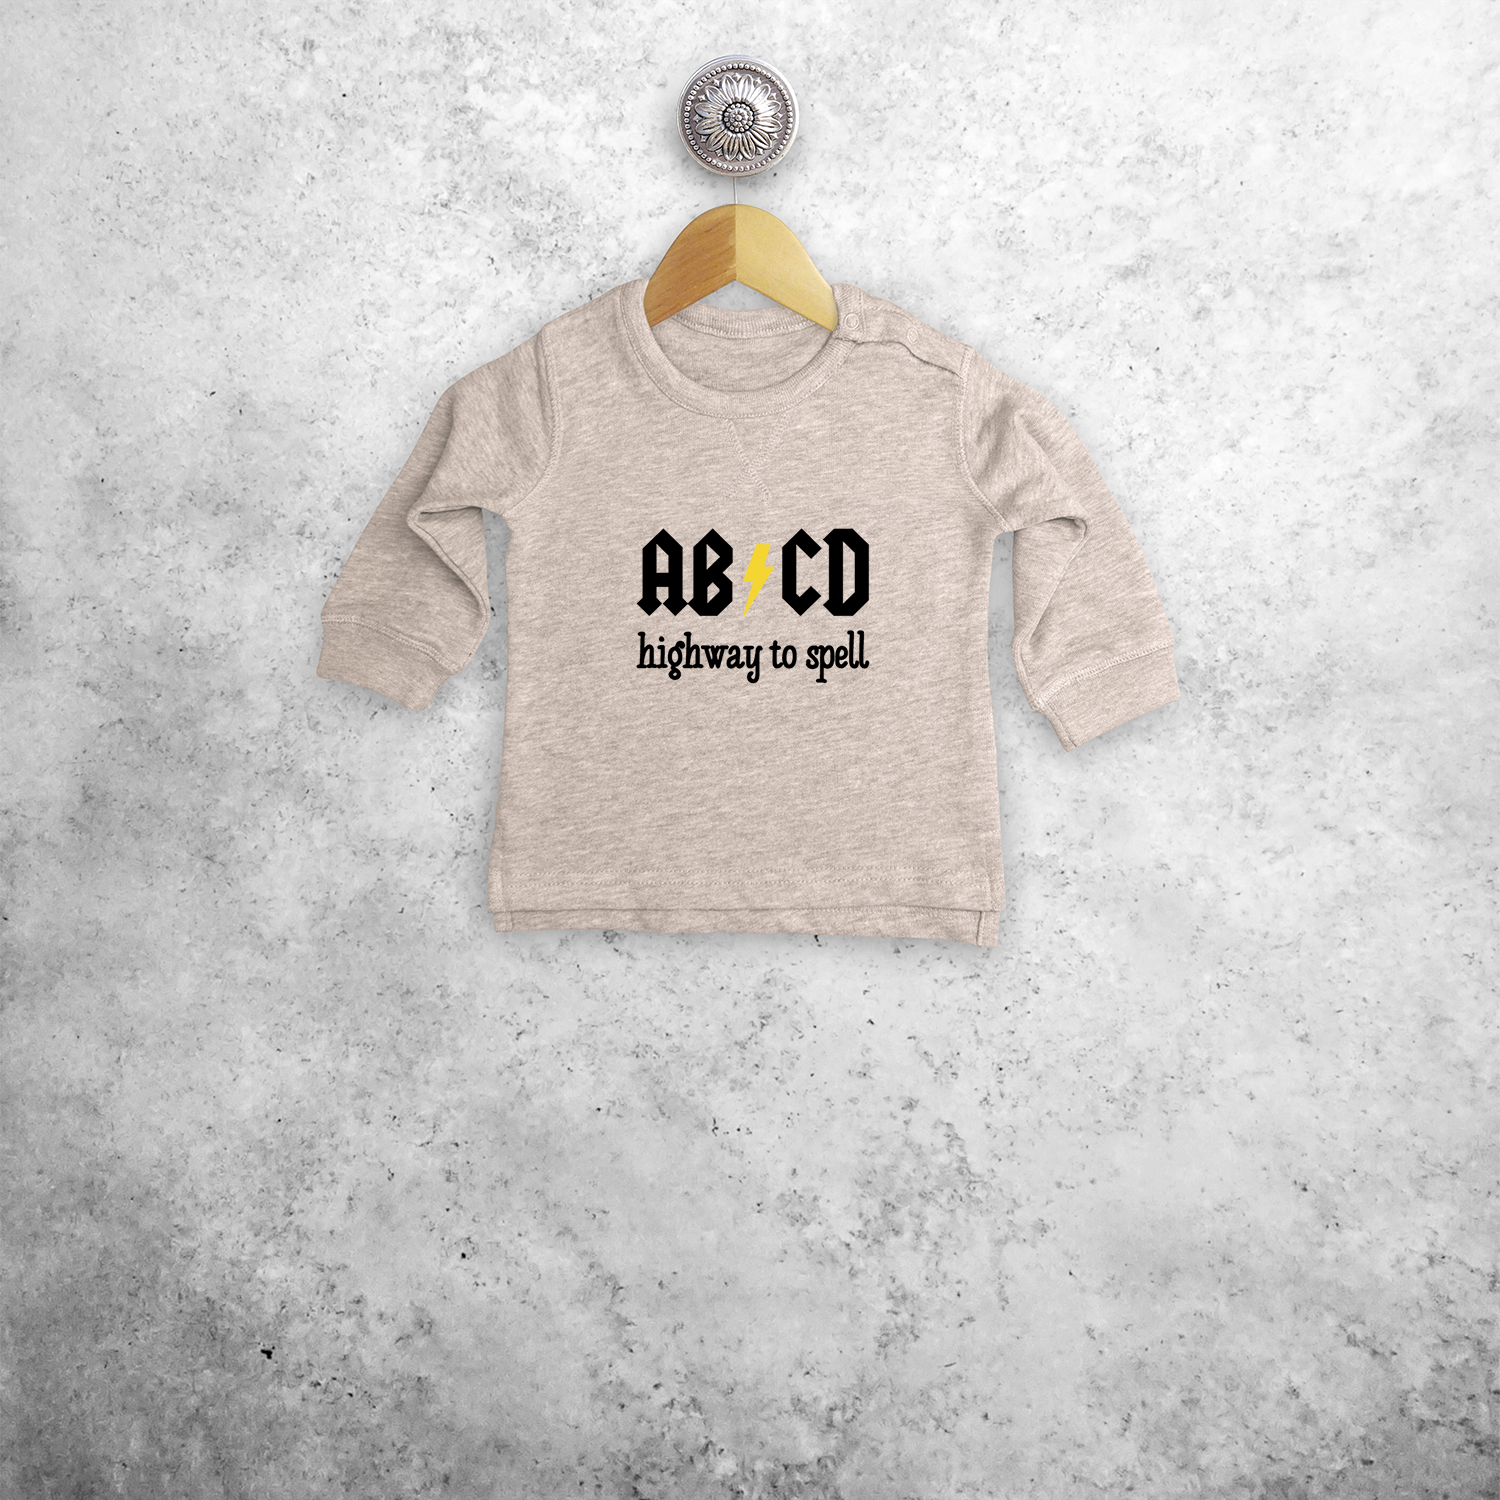 'ABCD - Highway to spell' baby sweater